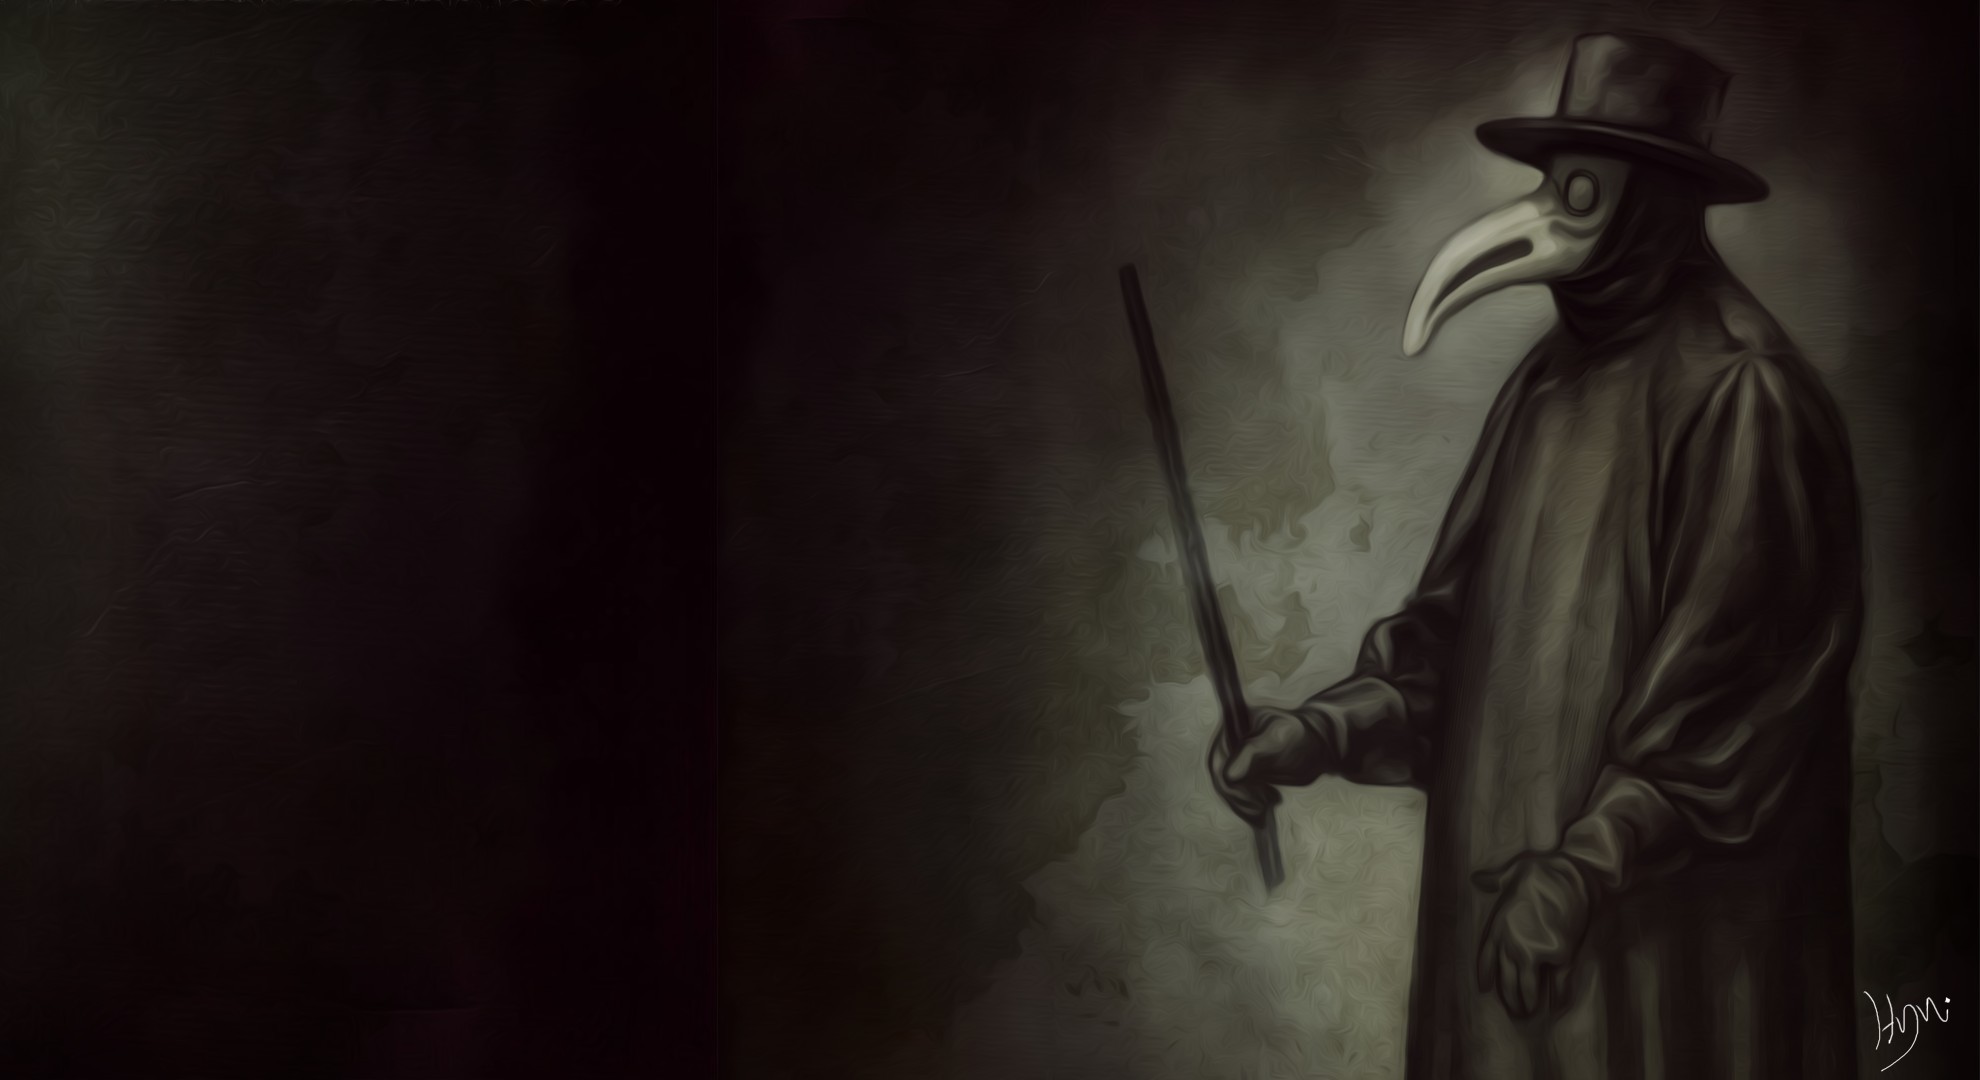 1980x1080, Doctors, The Doctor, Plague Doctors, Plague, - Ringa Ringa Roses Quotes , HD Wallpaper & Backgrounds